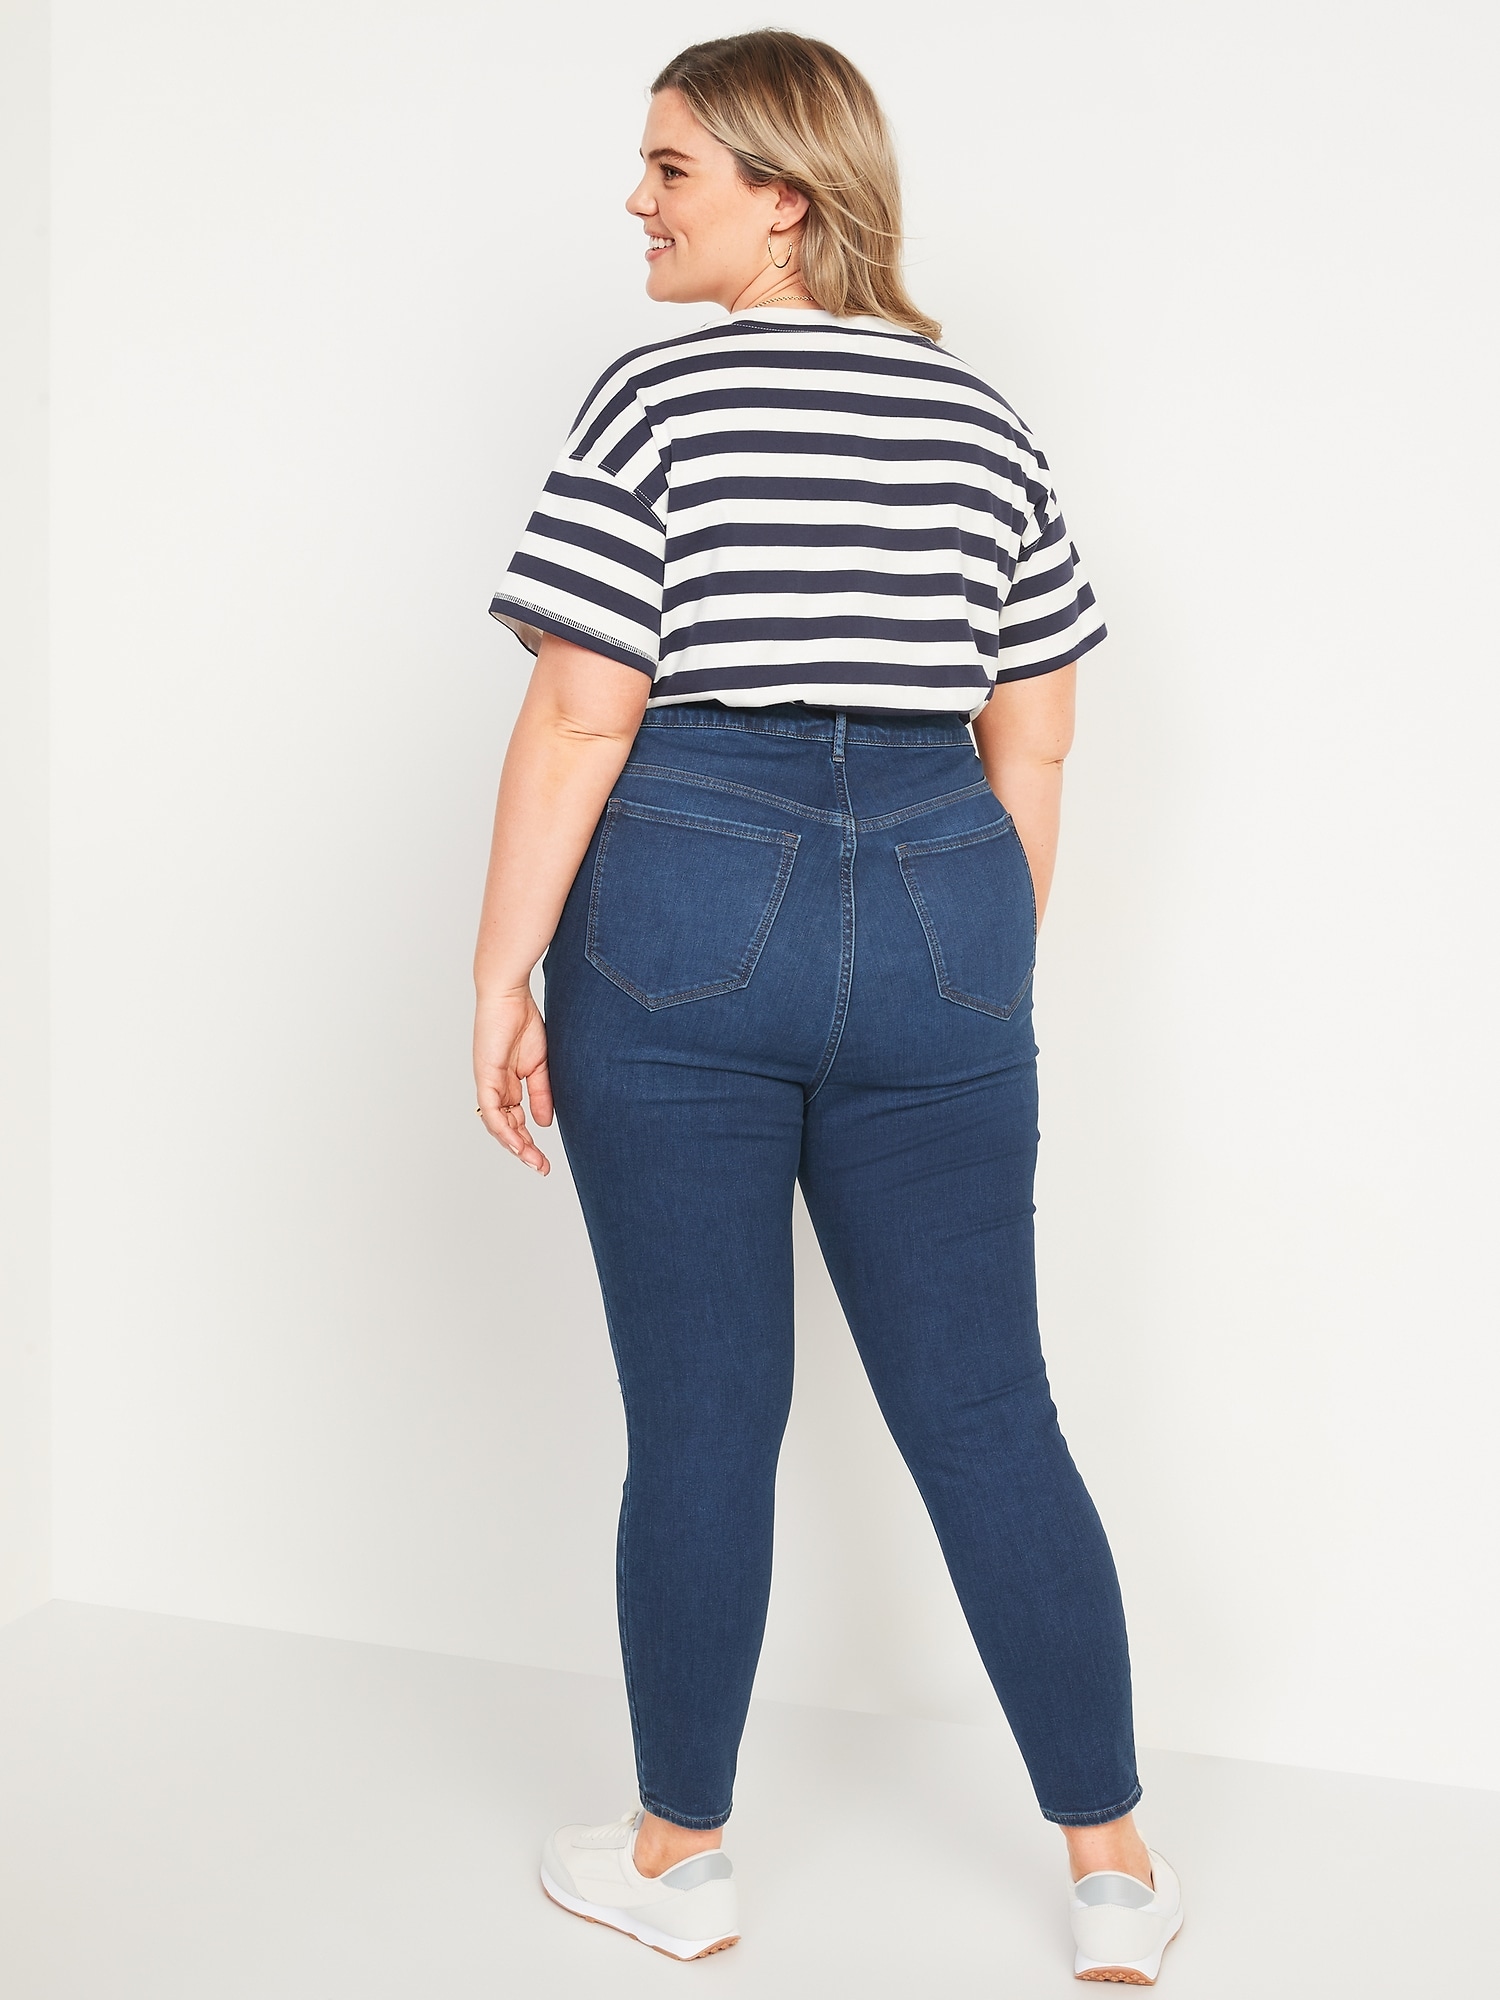 FitsYou 3-Sizes-in-1 Extra High-Waisted for Rockstar Old Navy Jeans Women | Ripped Super-Skinny